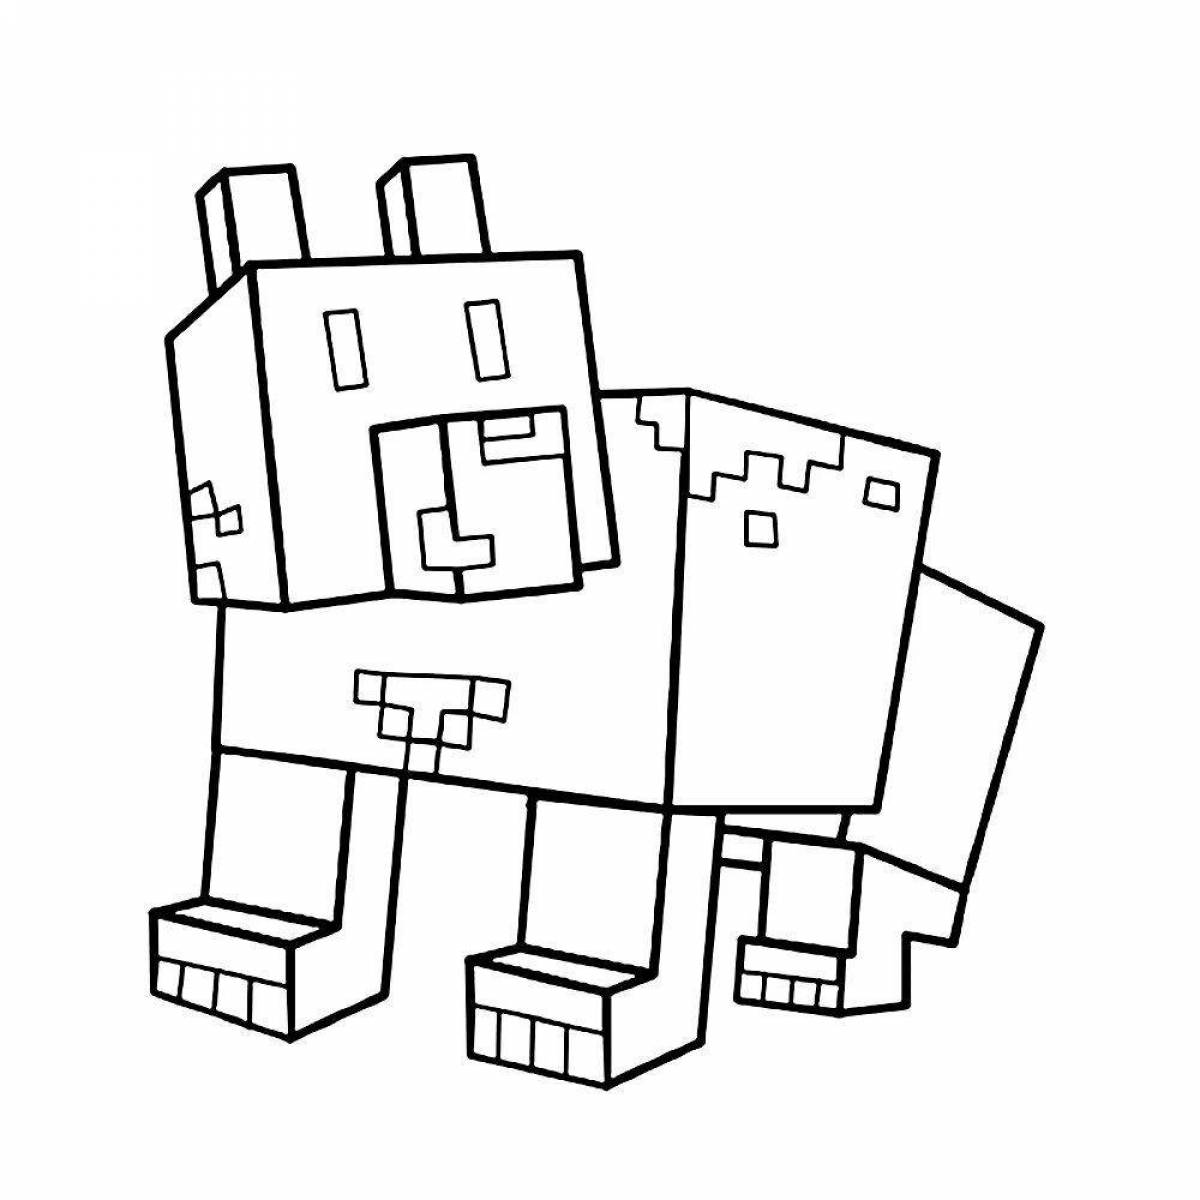 Playful minecraft fish coloring page